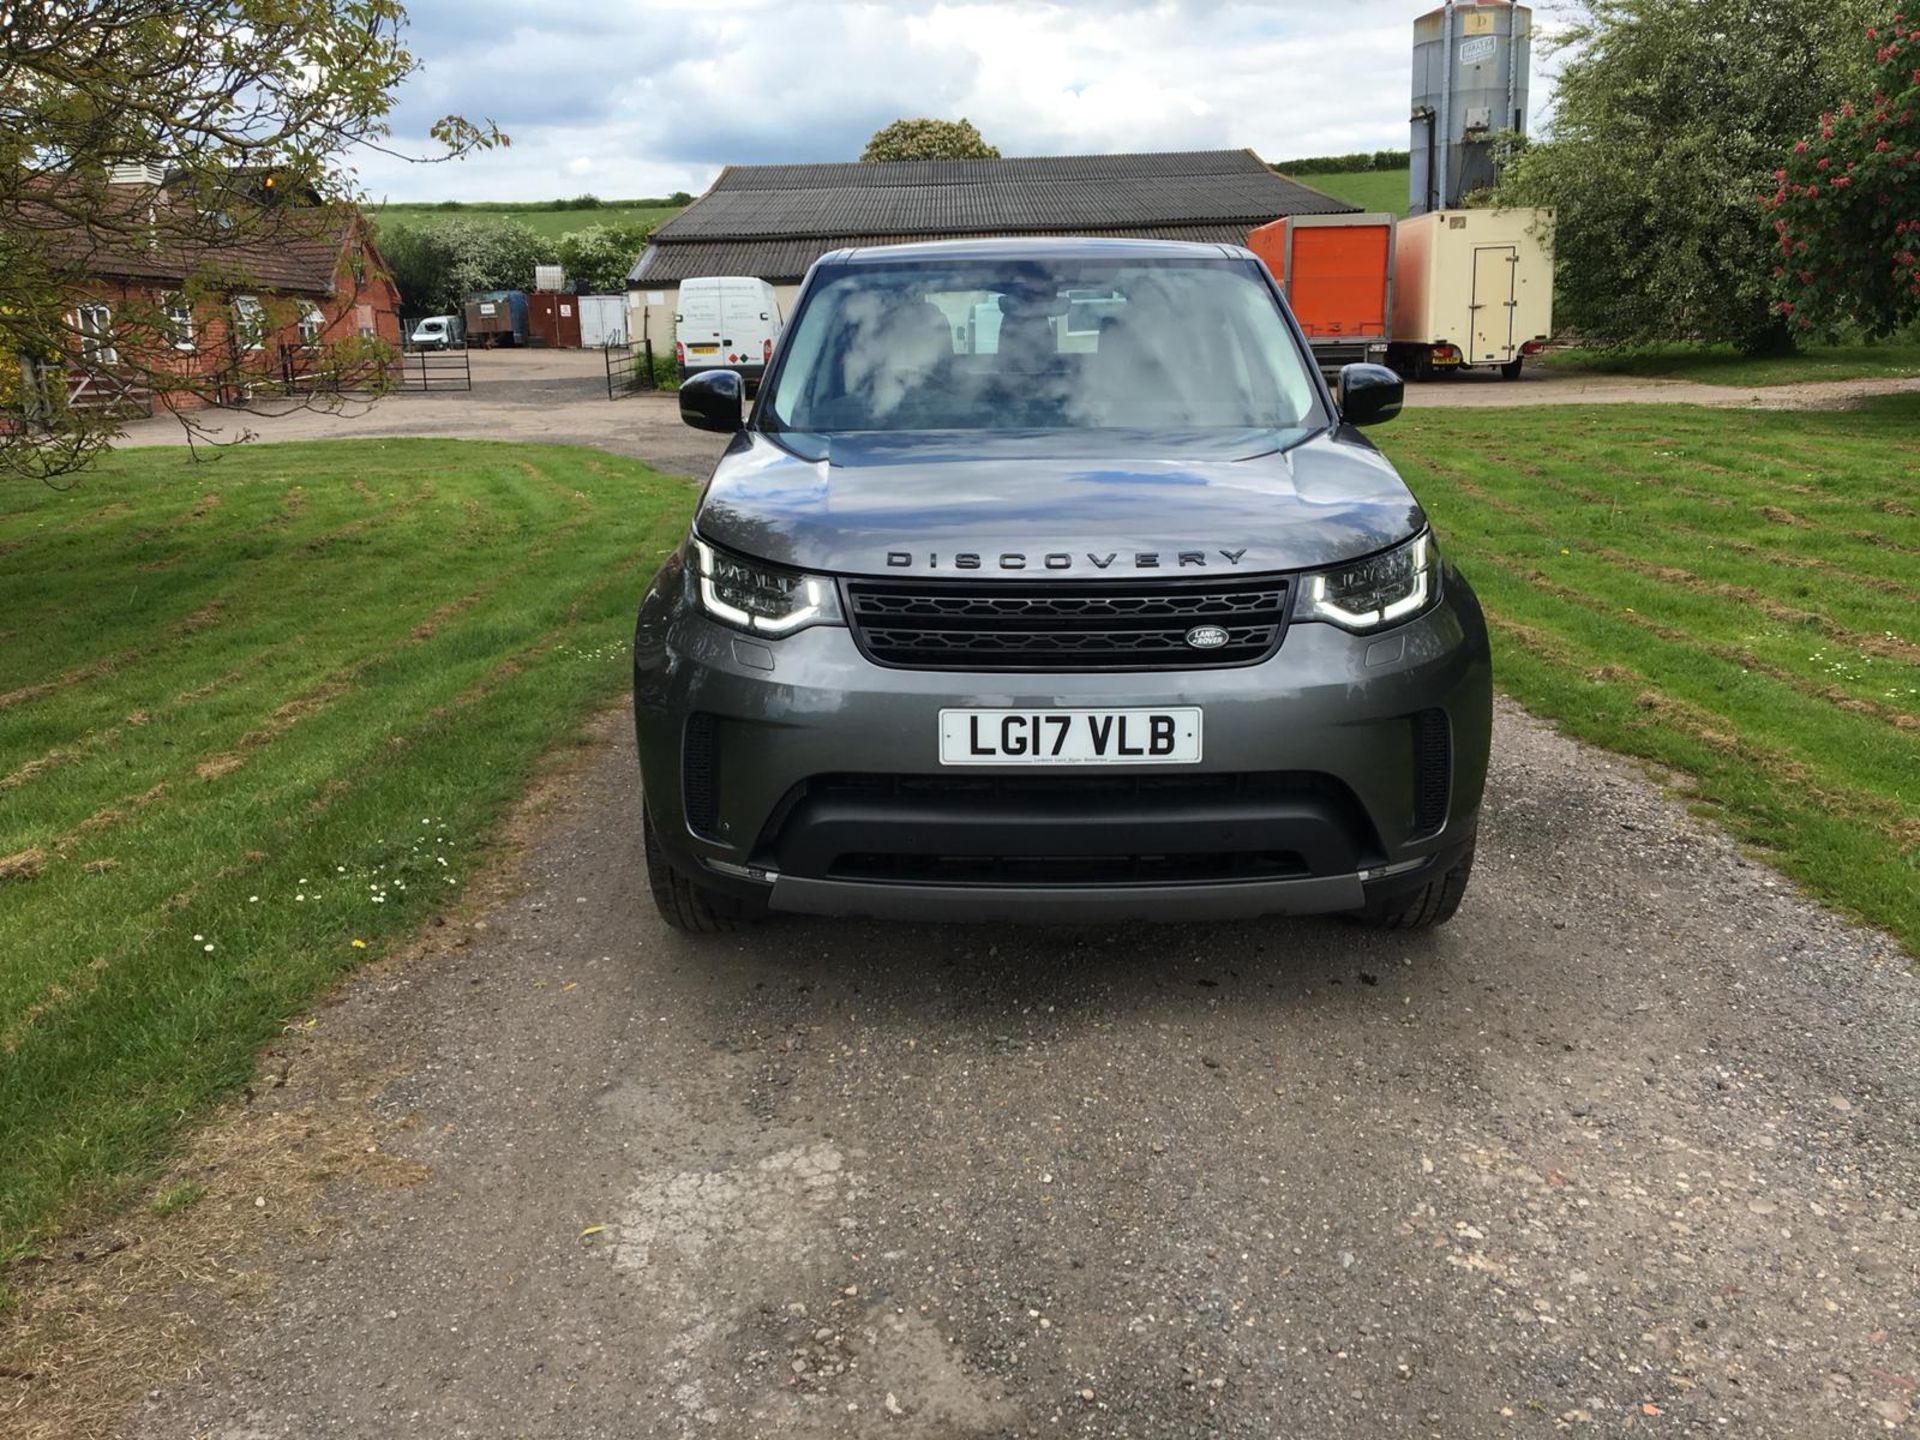 2017/17 REG LAND ROVER DISCOVERY HSE TD6 AUTO 3.0 DIESEL GREY, SHOWING 0 FORMER KEEPERS *NO VAT* - Image 2 of 23